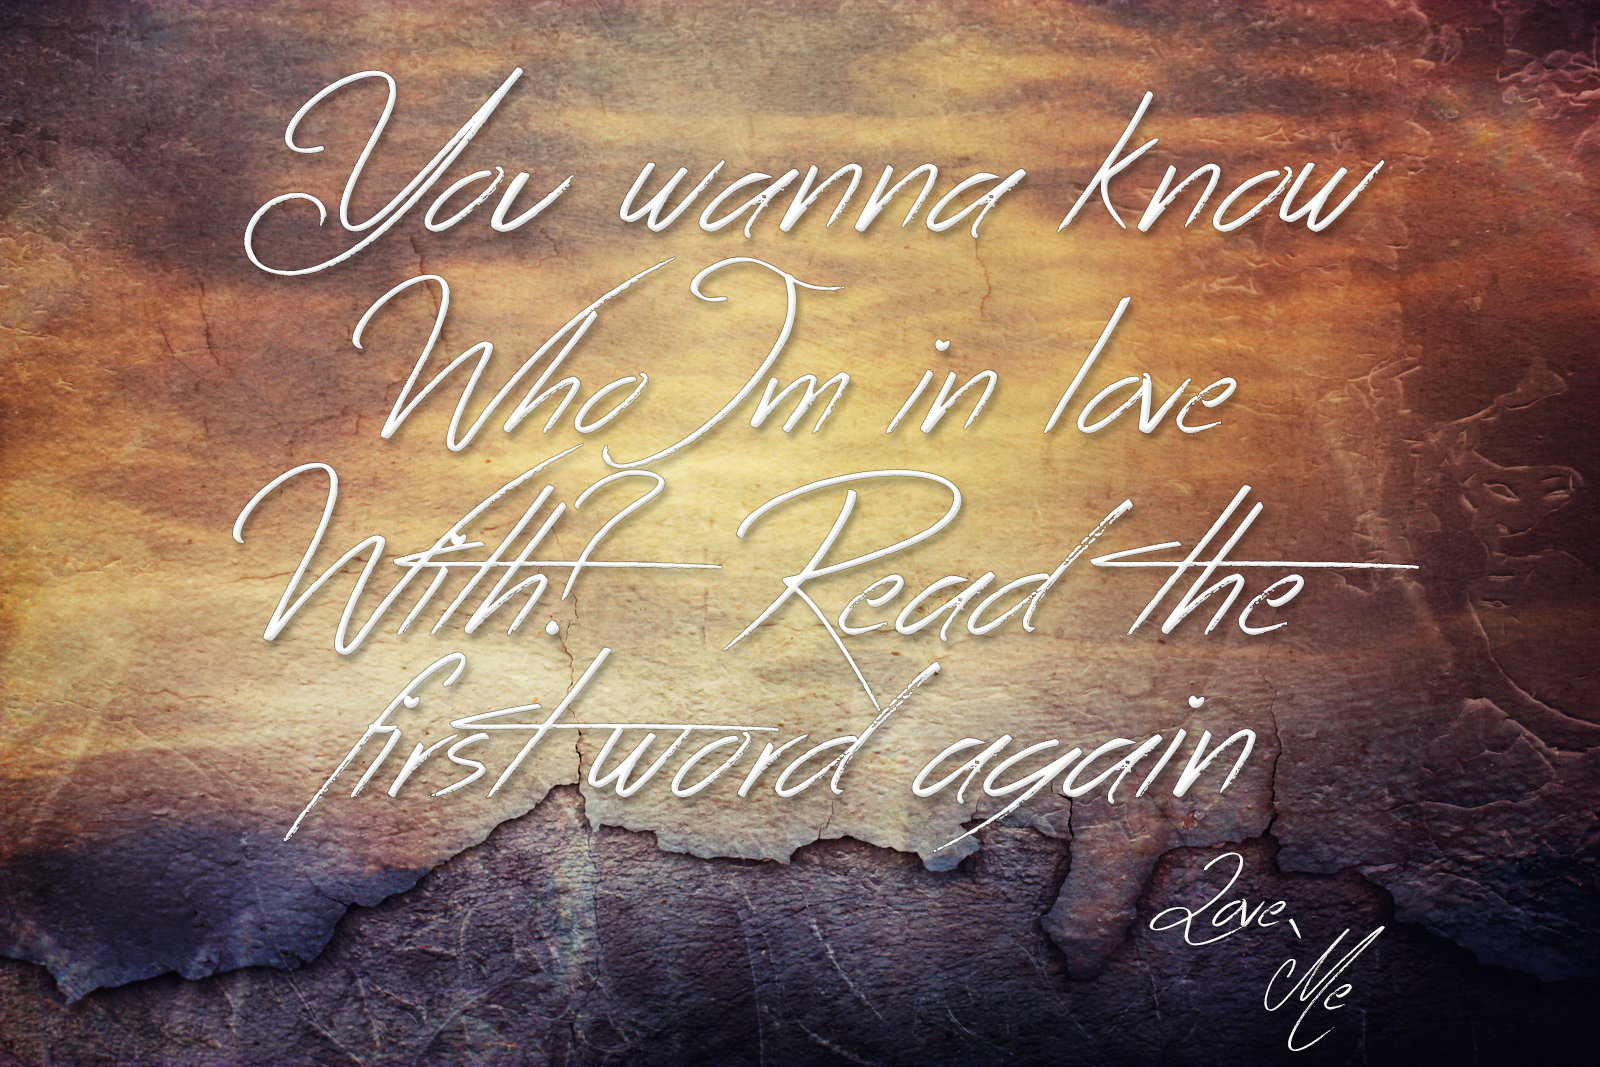 calligraphy - You wanna know Who am in love With Read the first word again Love Me